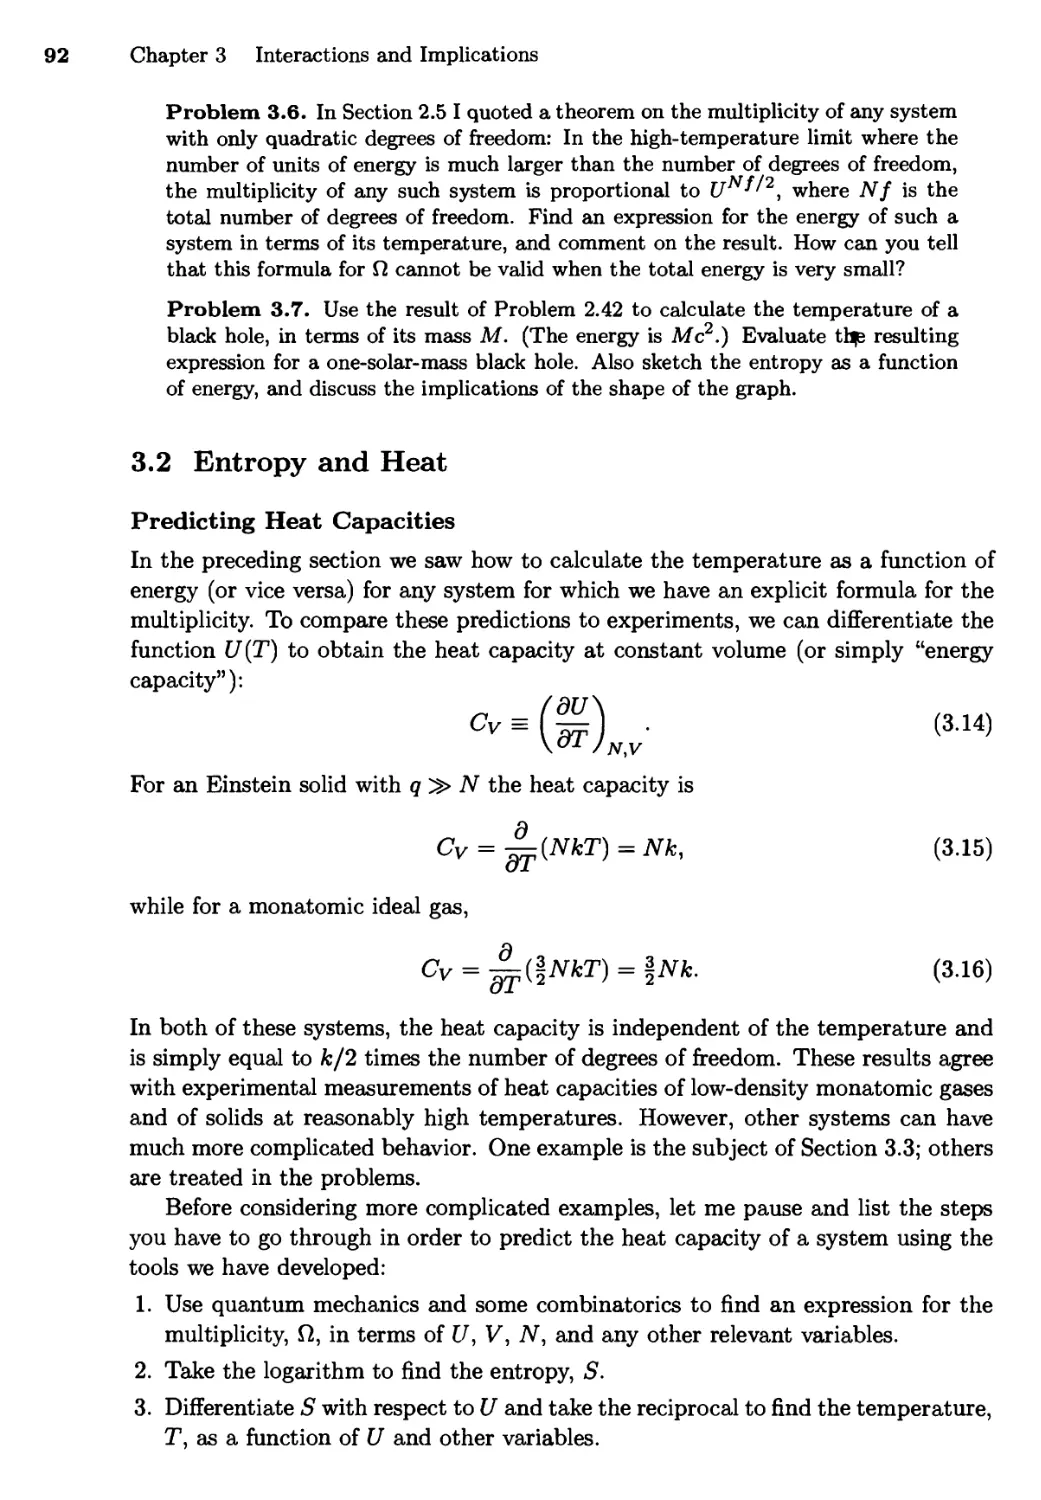 3.2 Entropy and Heat